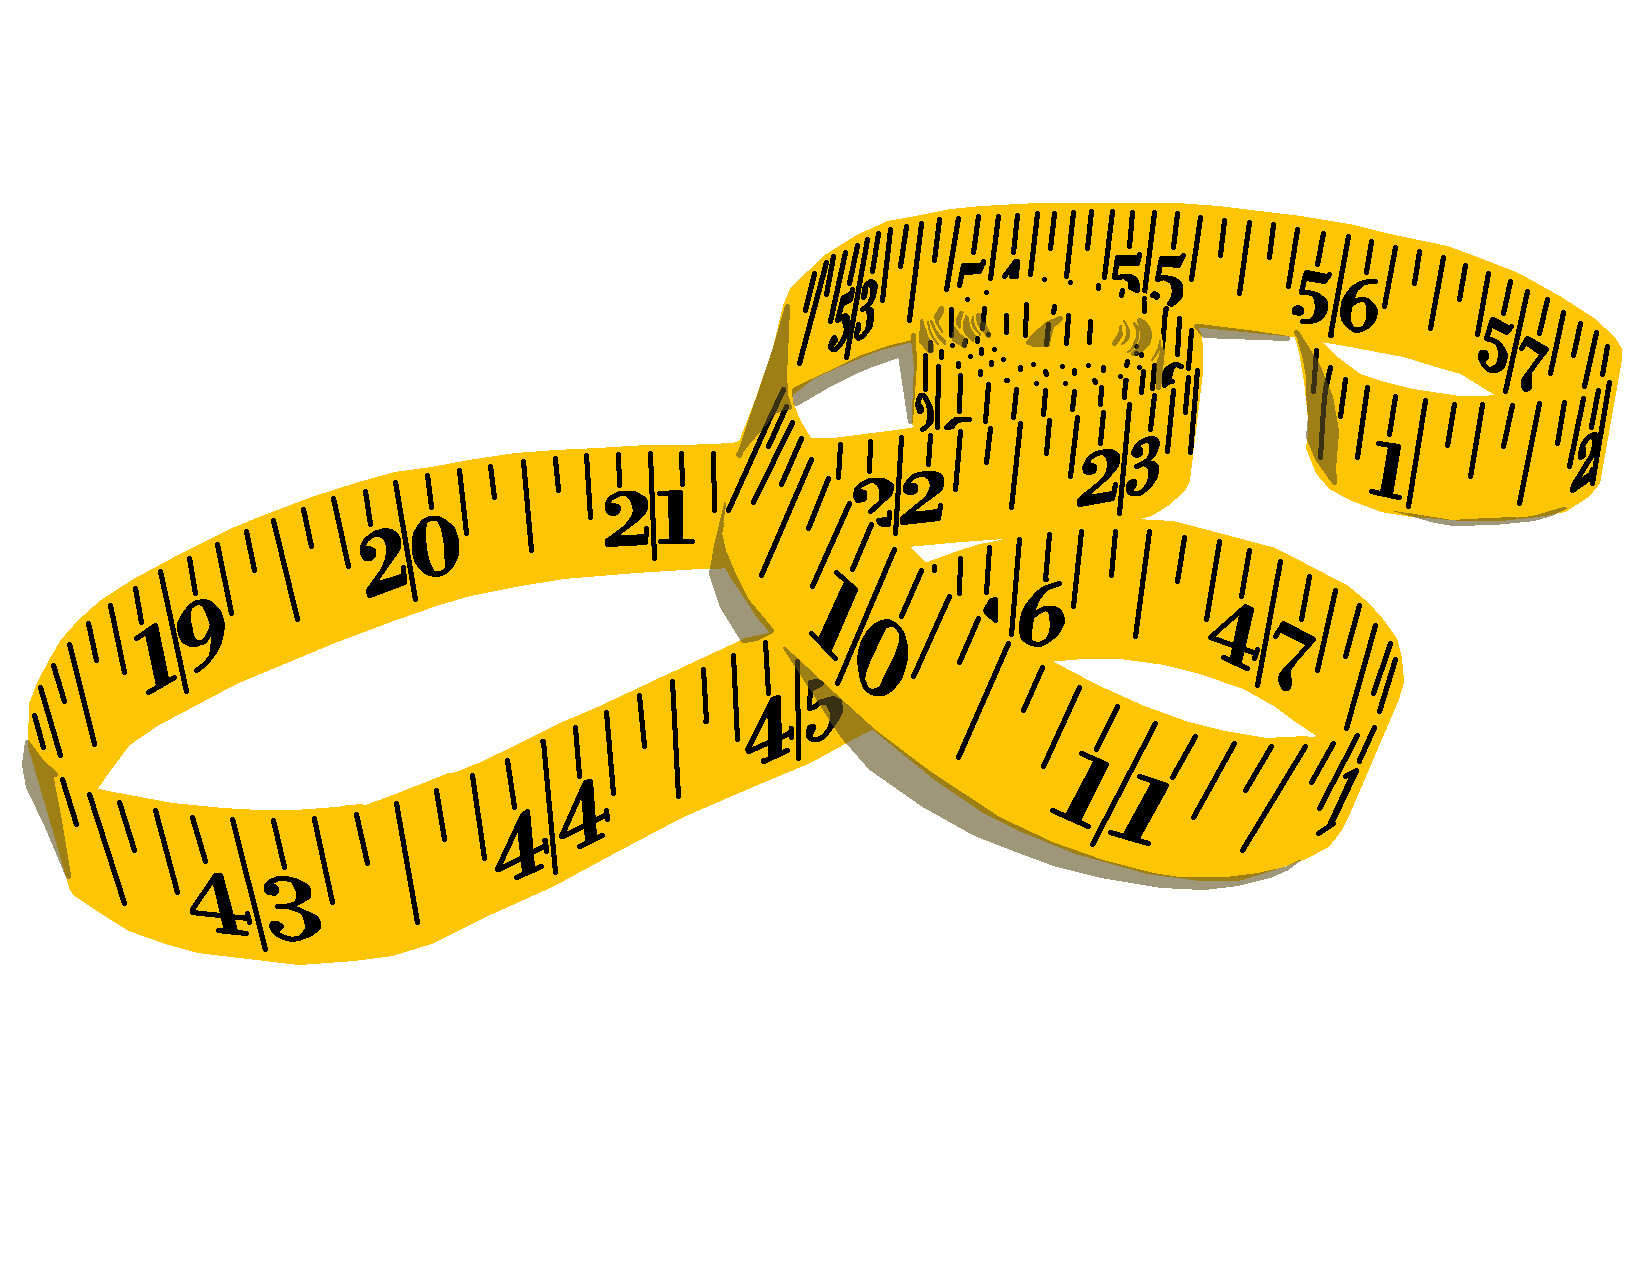 sewing tape measure clipart - Clip Art Library